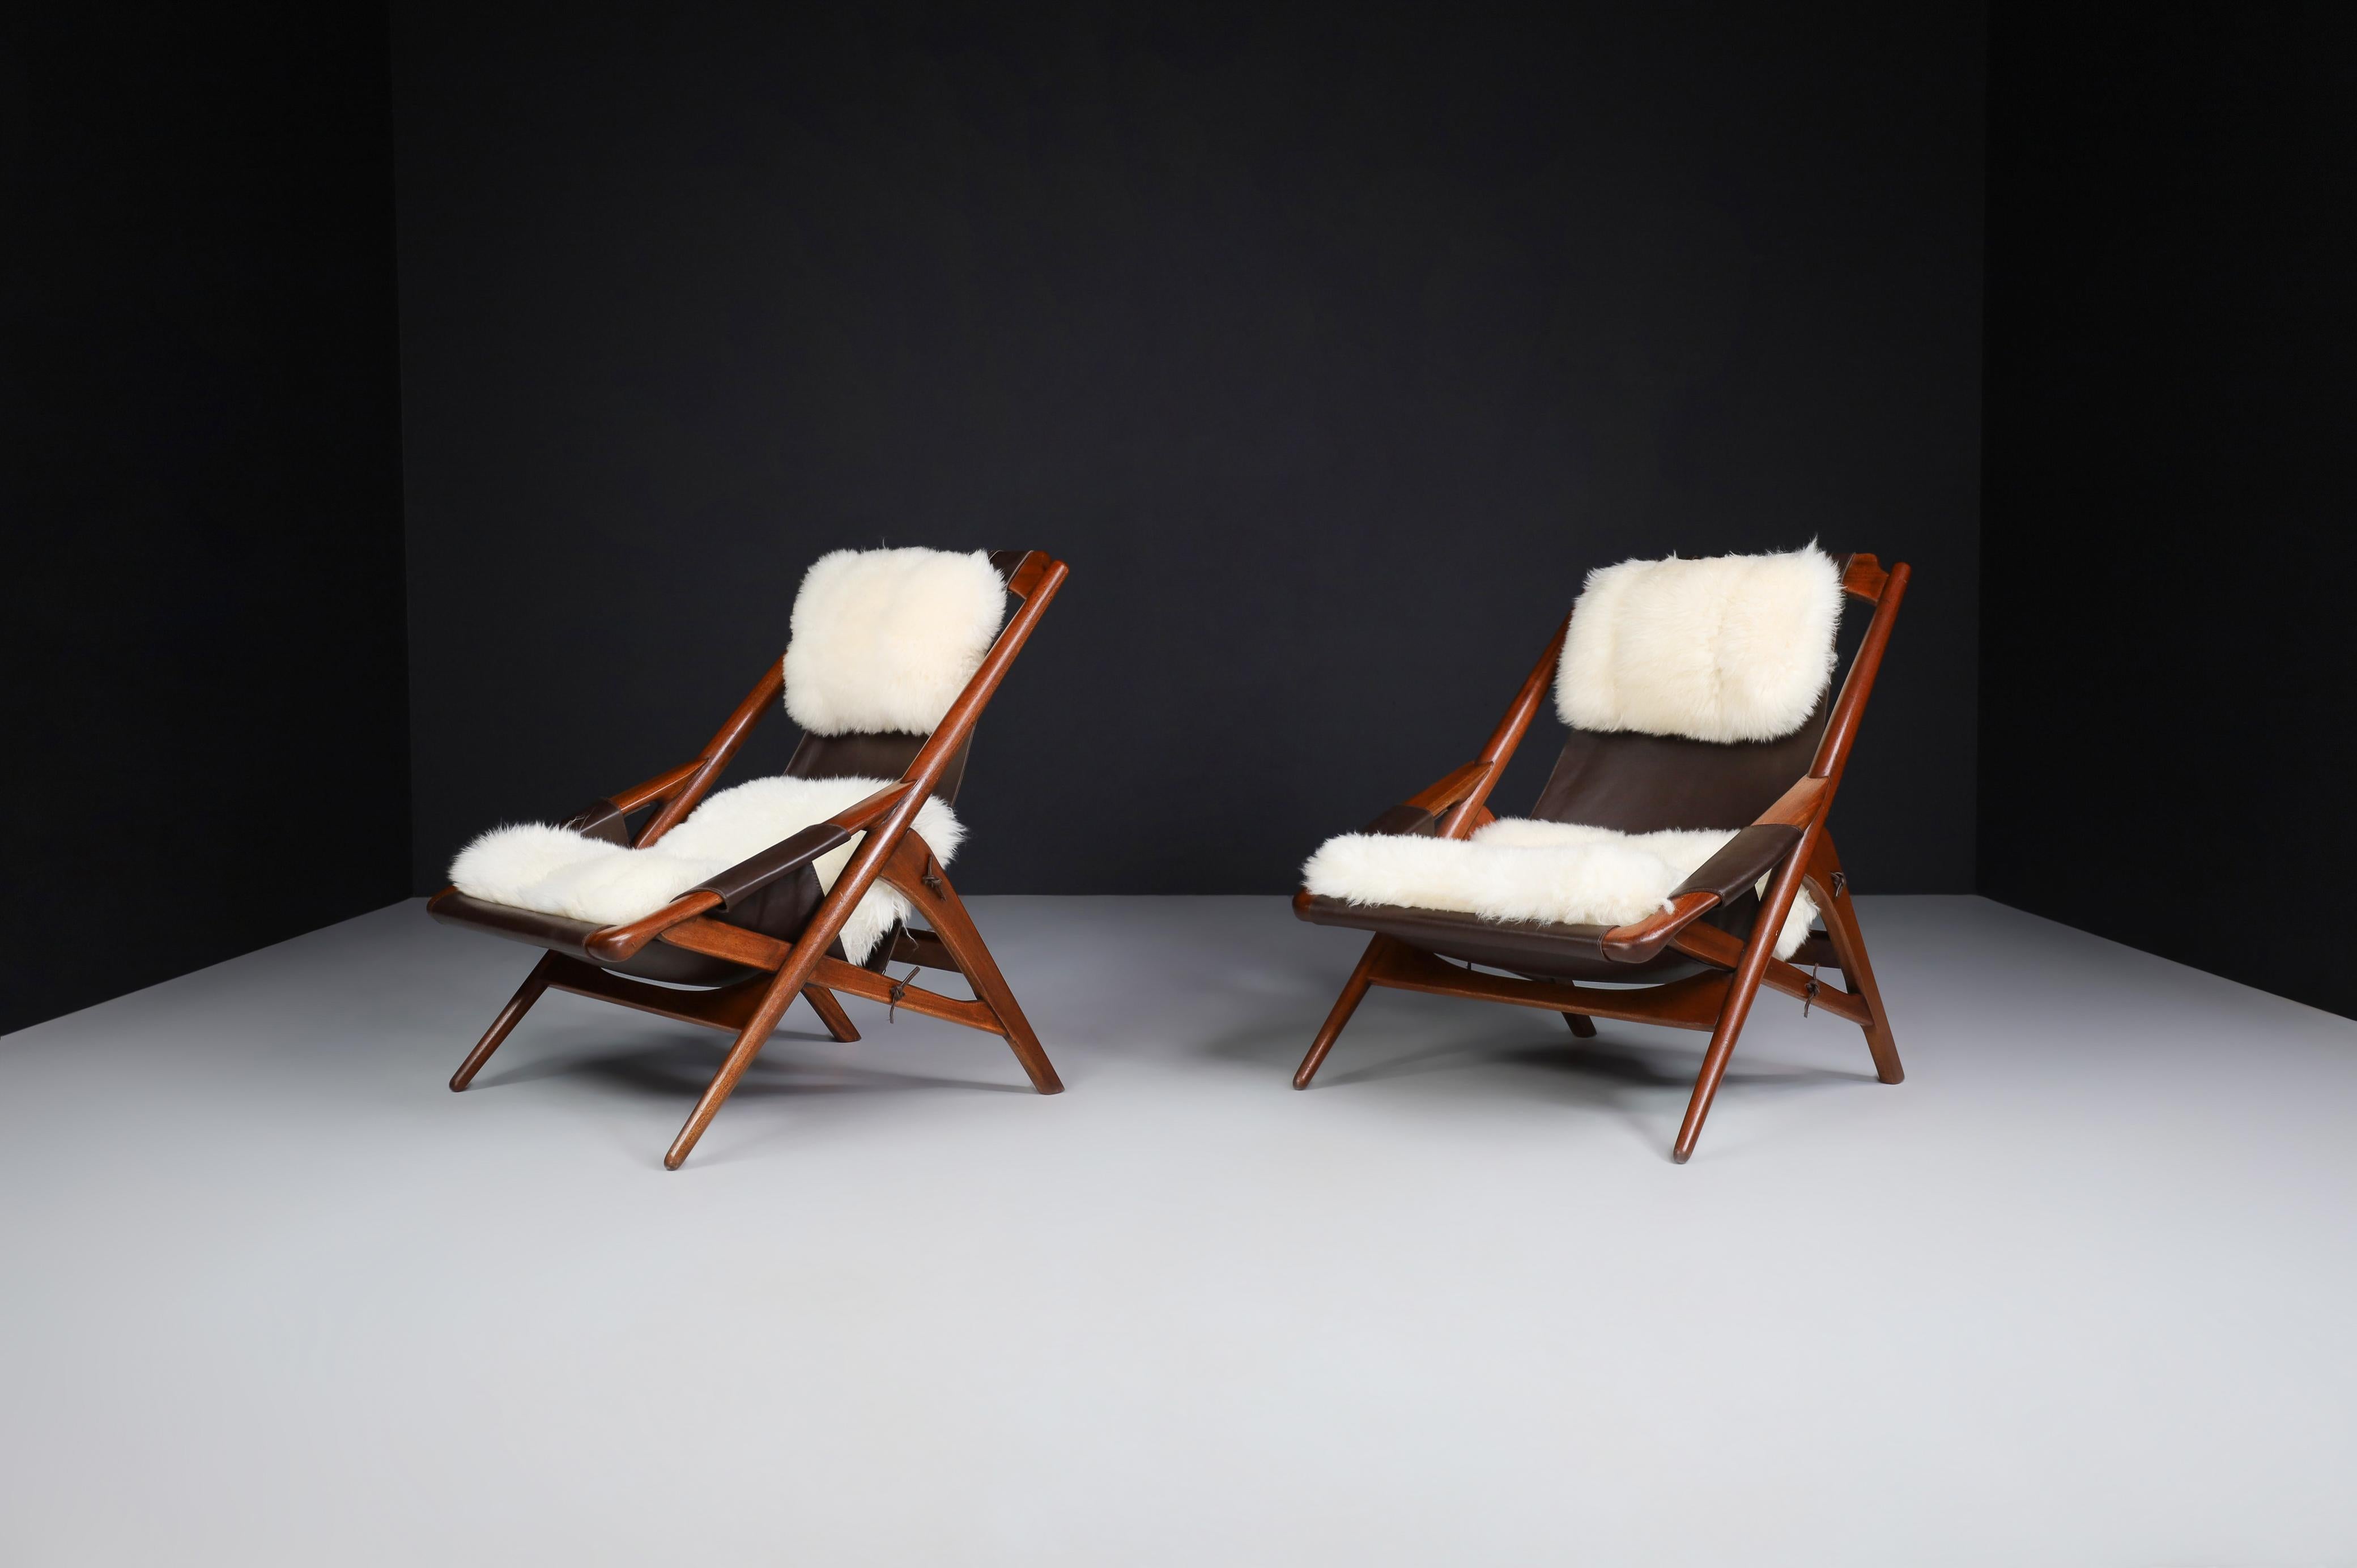 European W.D. Andersag Lounge Chairs Teak and Leather, Italy, 1959 For Sale